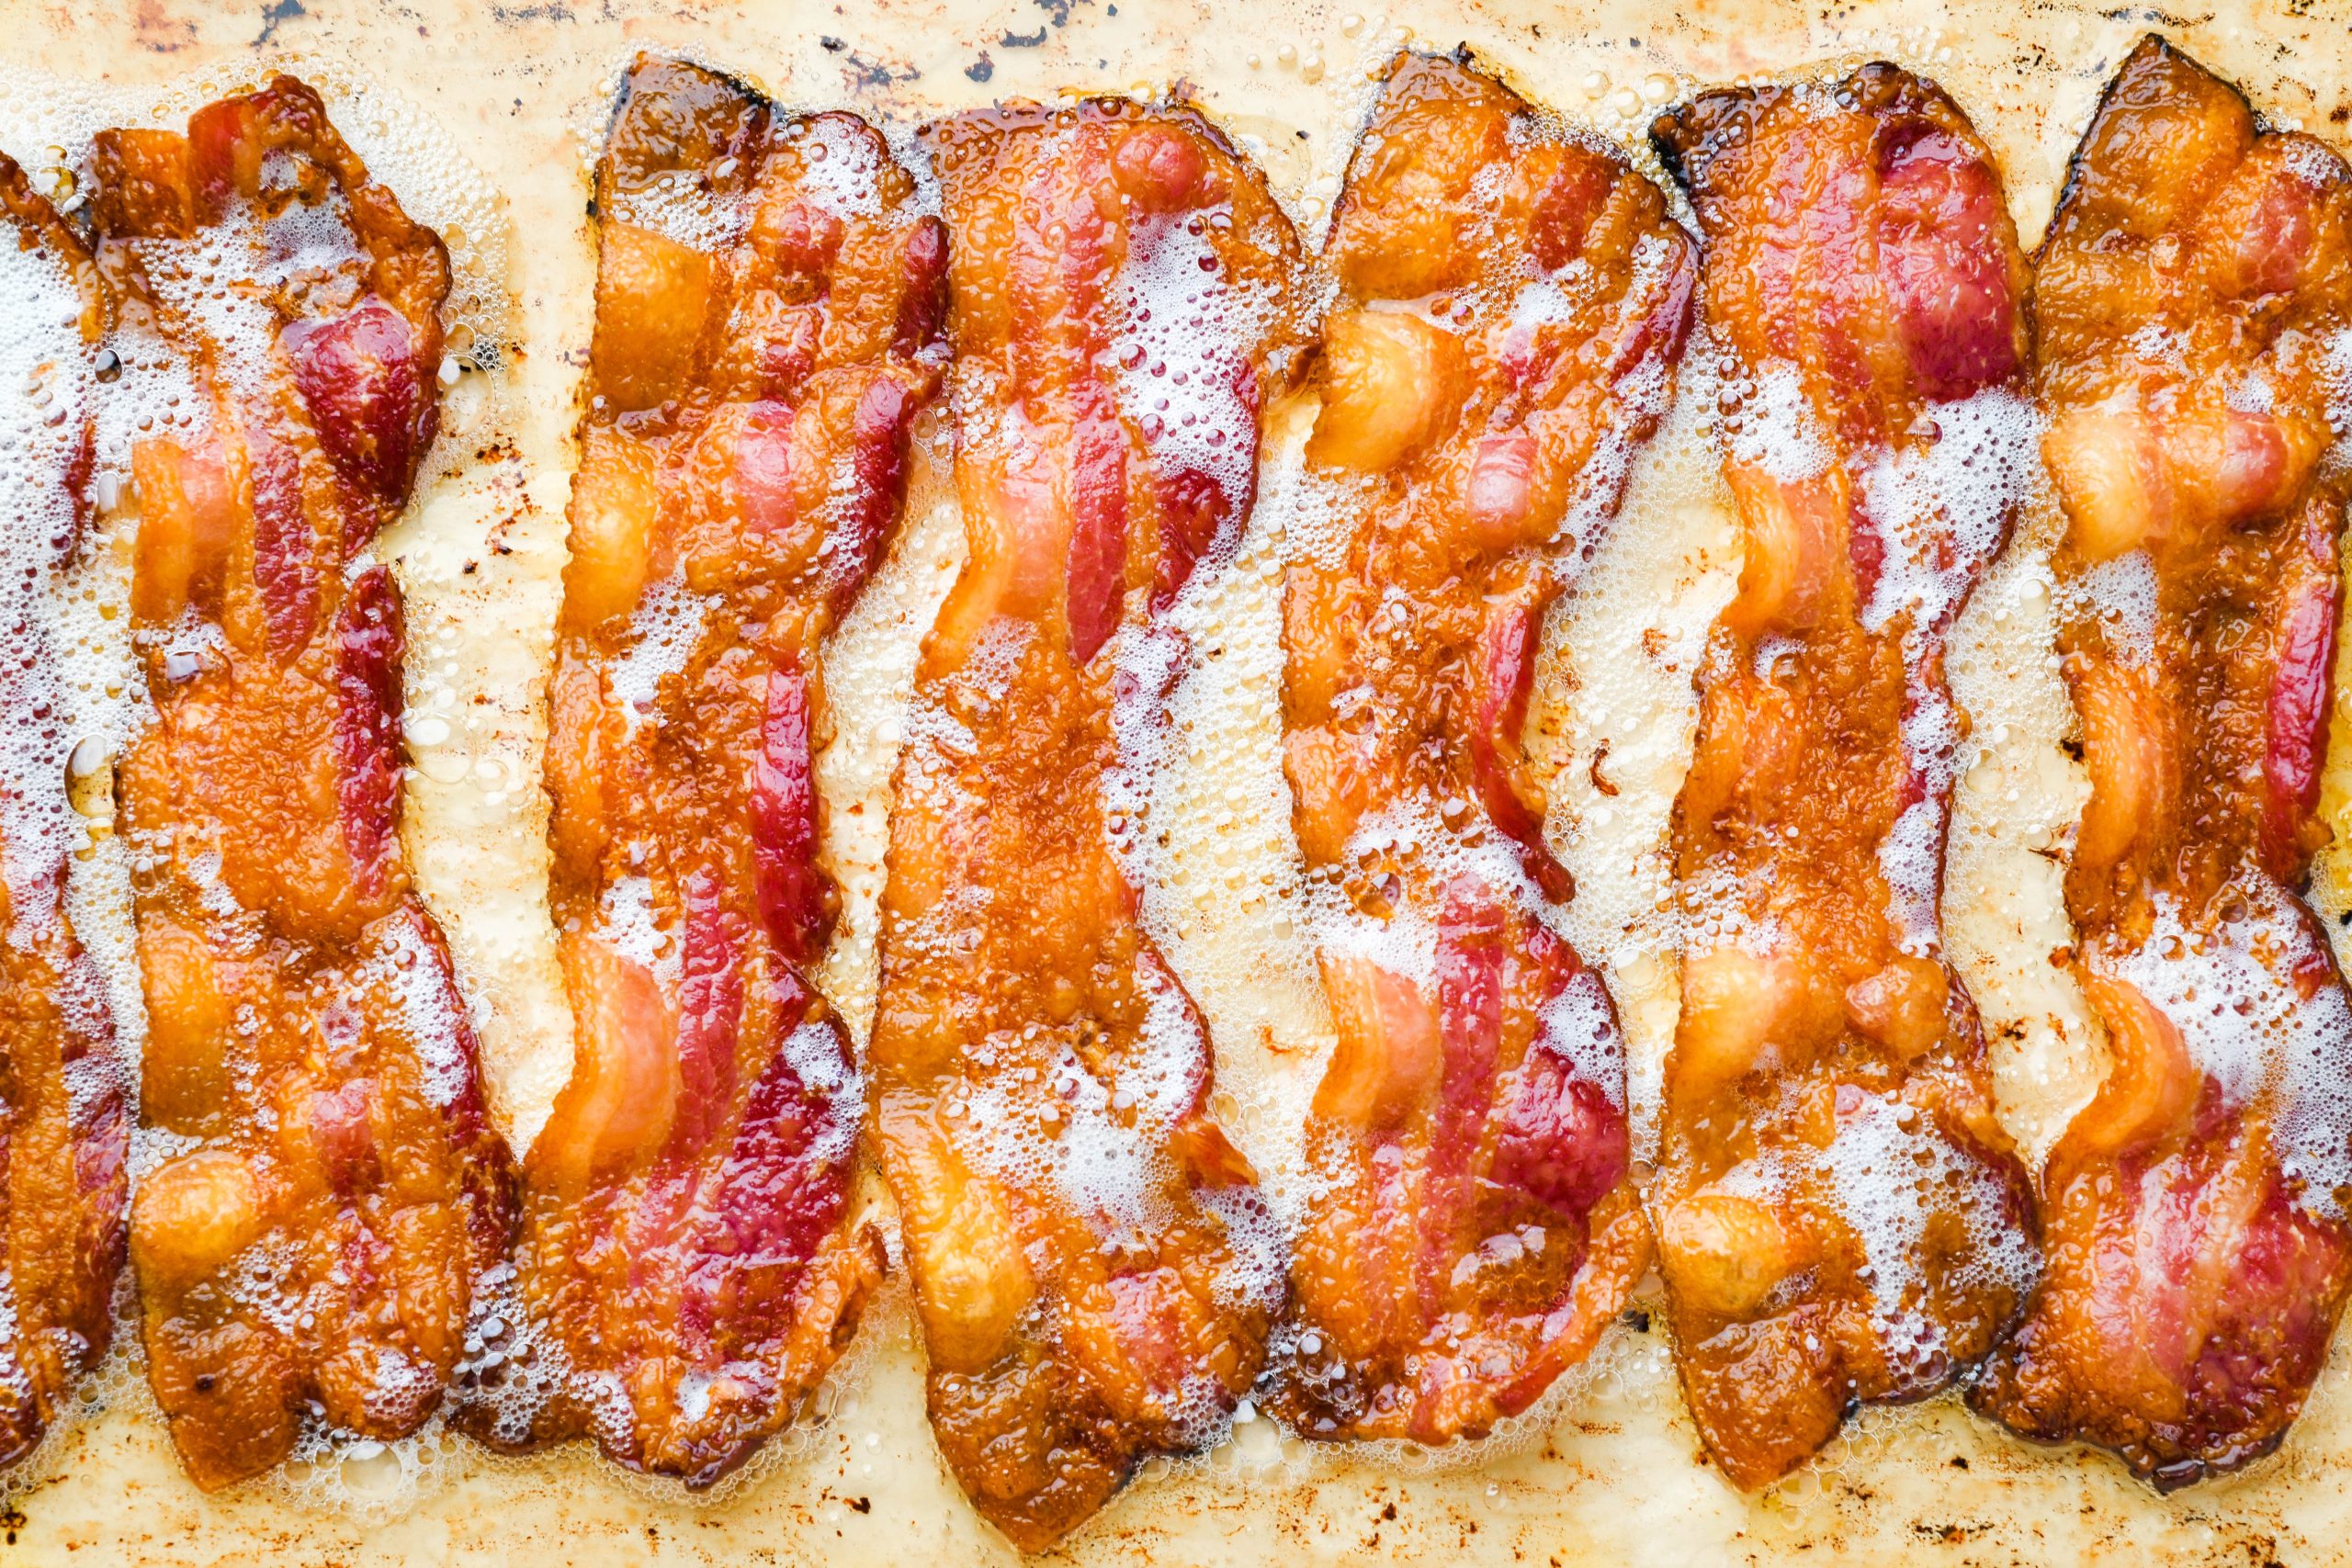 https://nyssaskitchen.com/wp-content/uploads/2021/10/Bacon-in-the-Oven-4-scaled.jpg